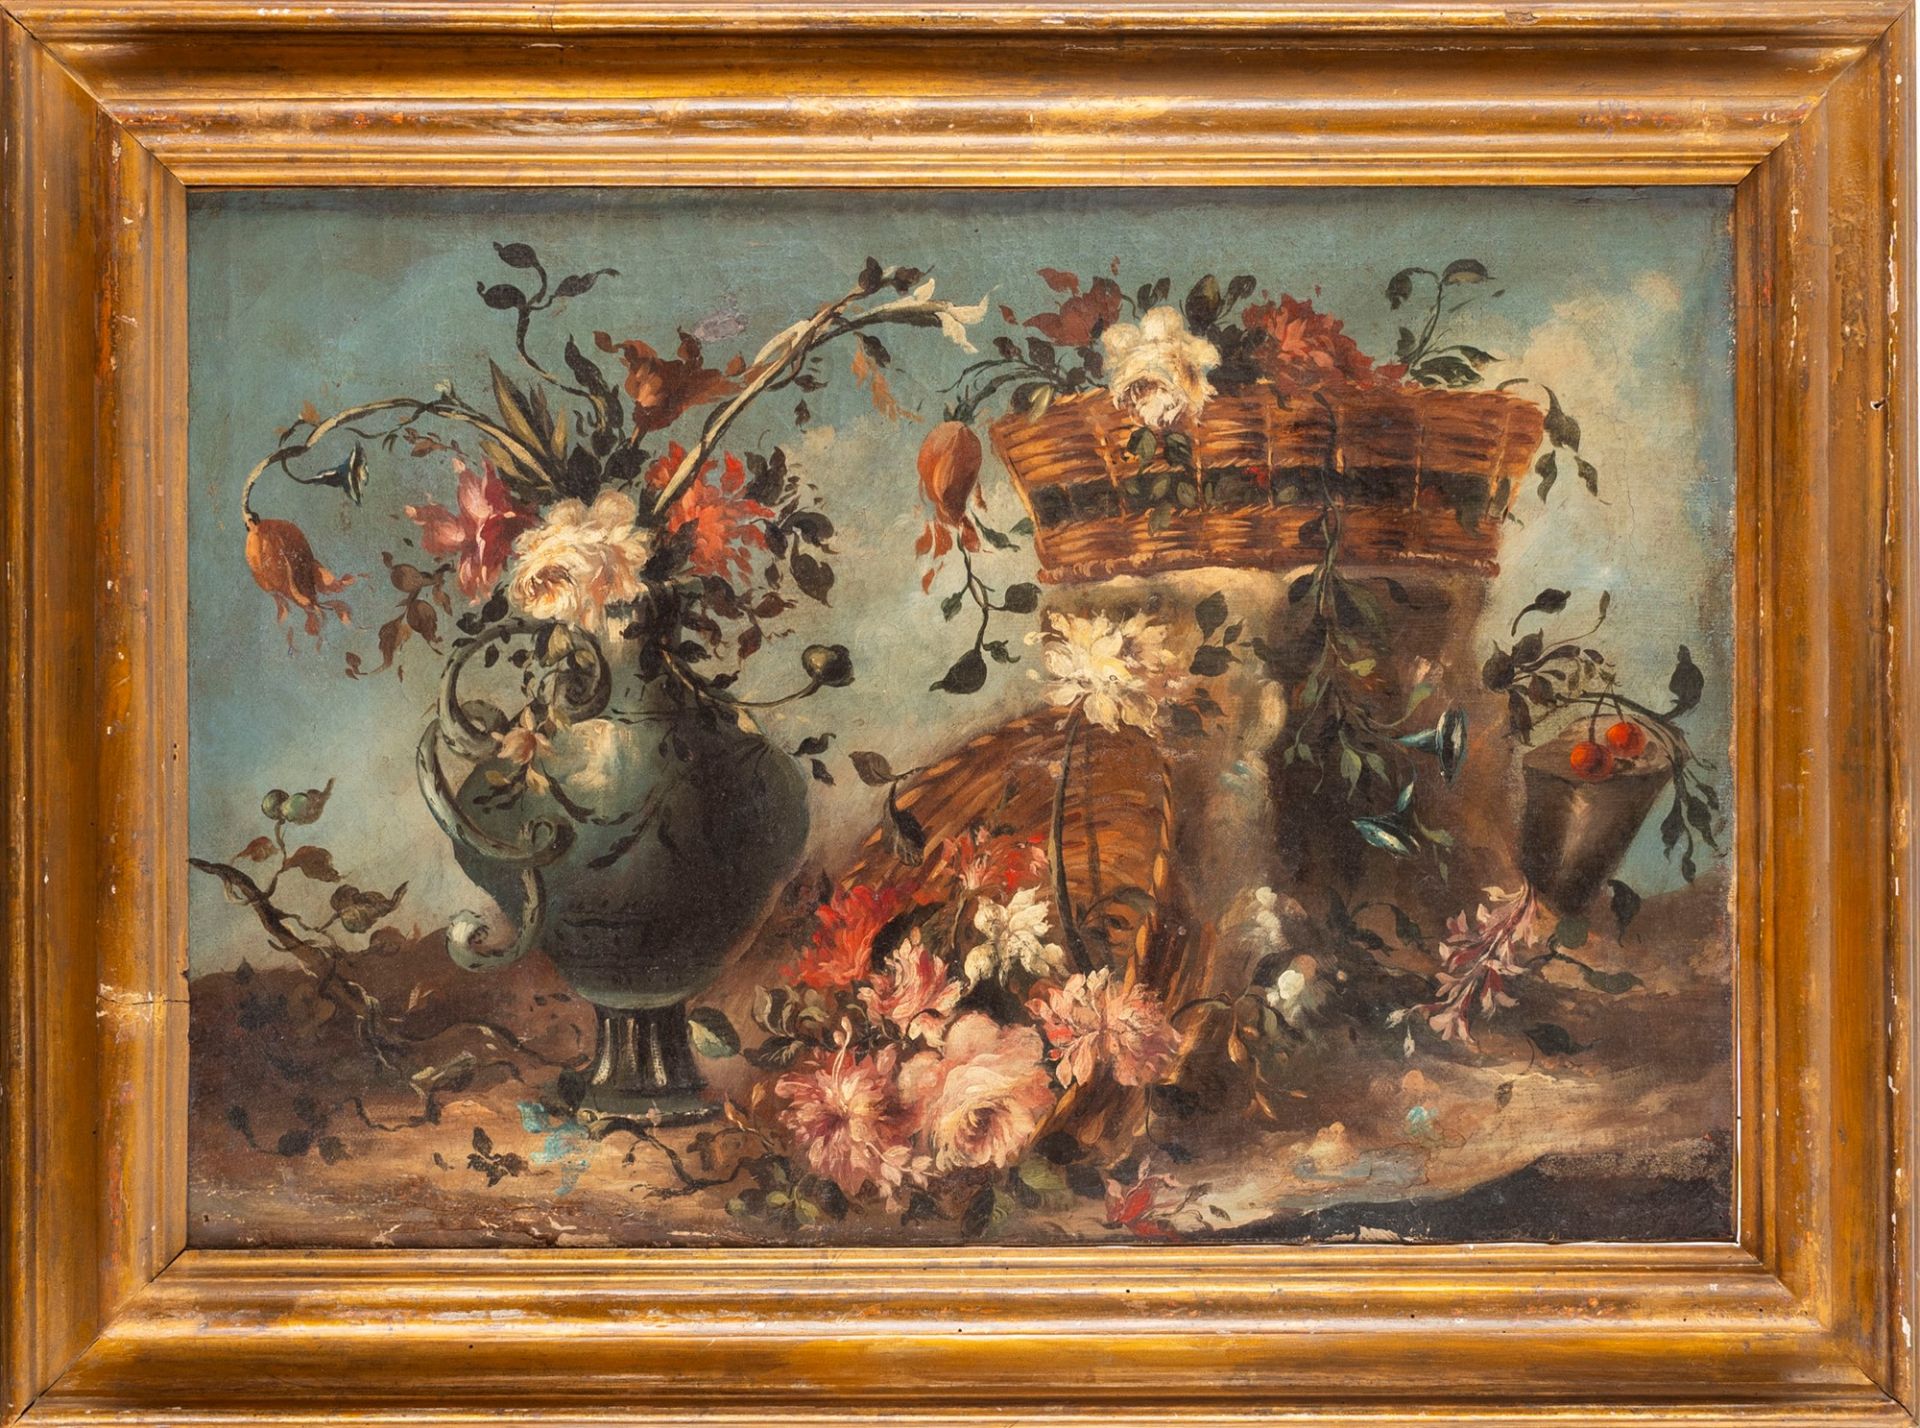 Follower of Francesco Guardi - Still life with vase and baskets of flowers en plein air - Image 2 of 3